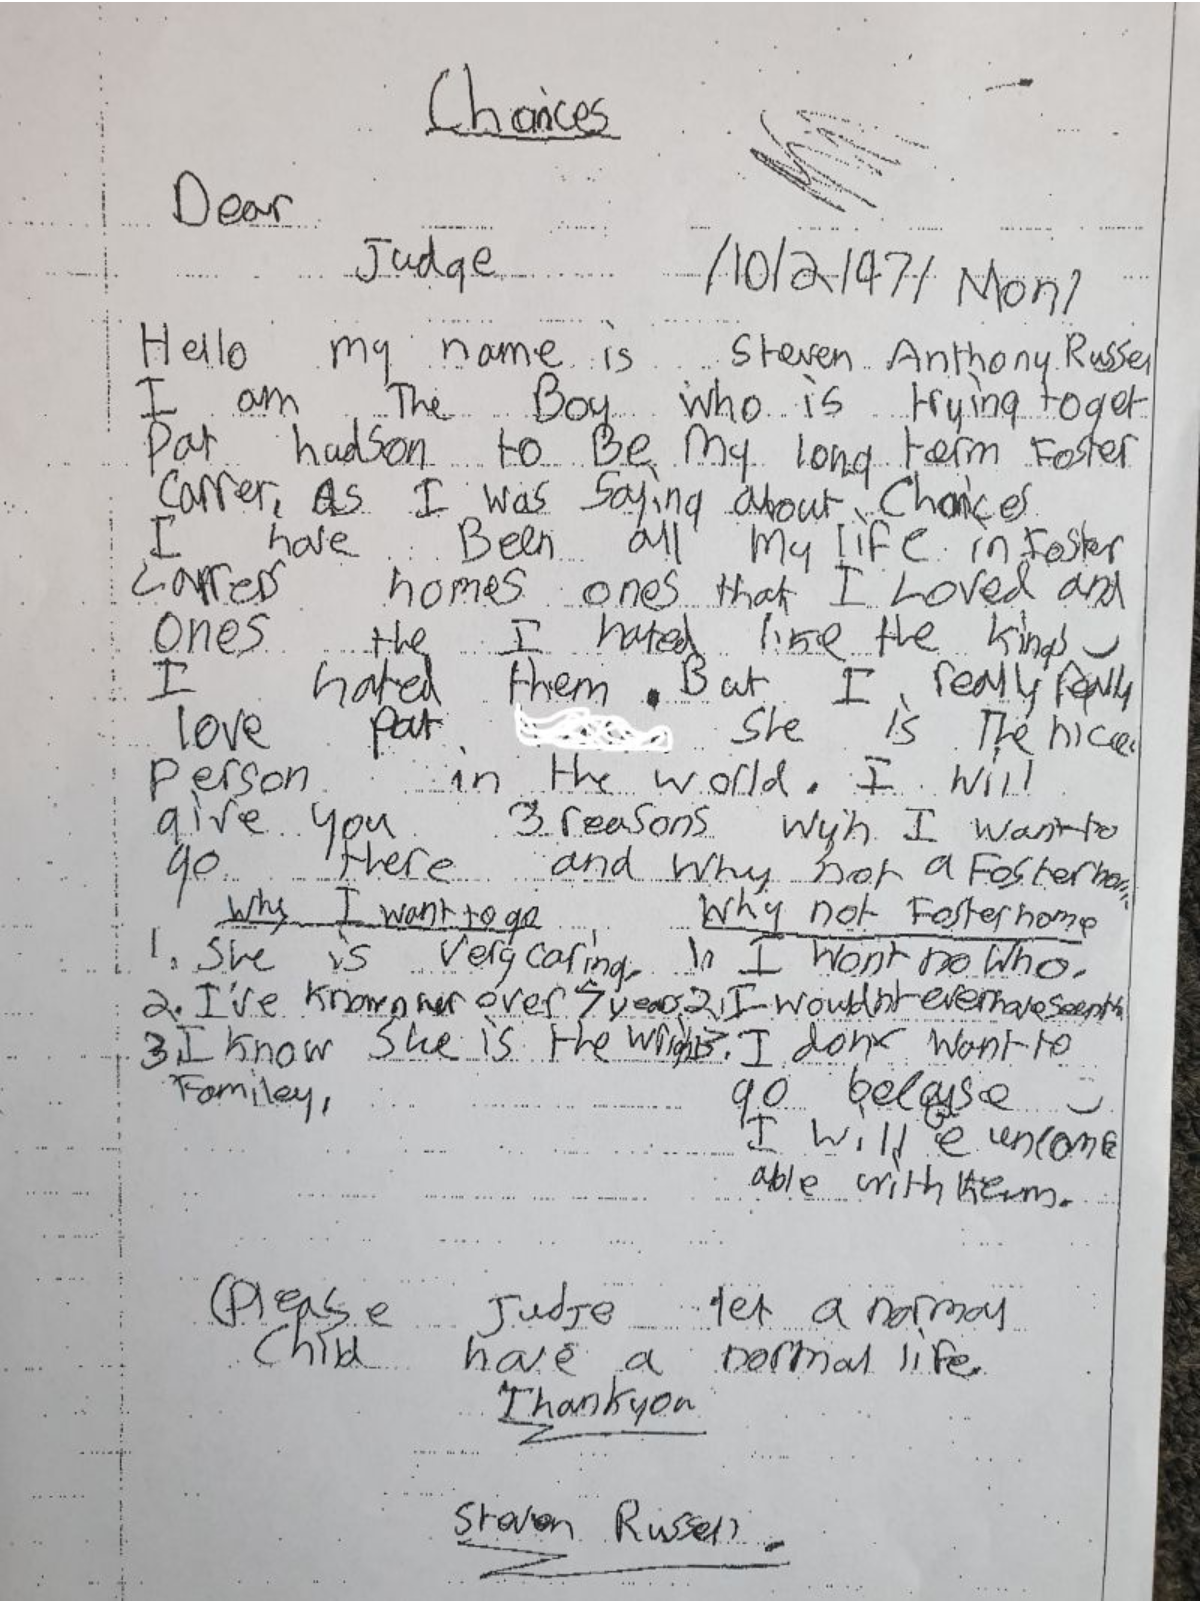 12-year-old's letter to judge